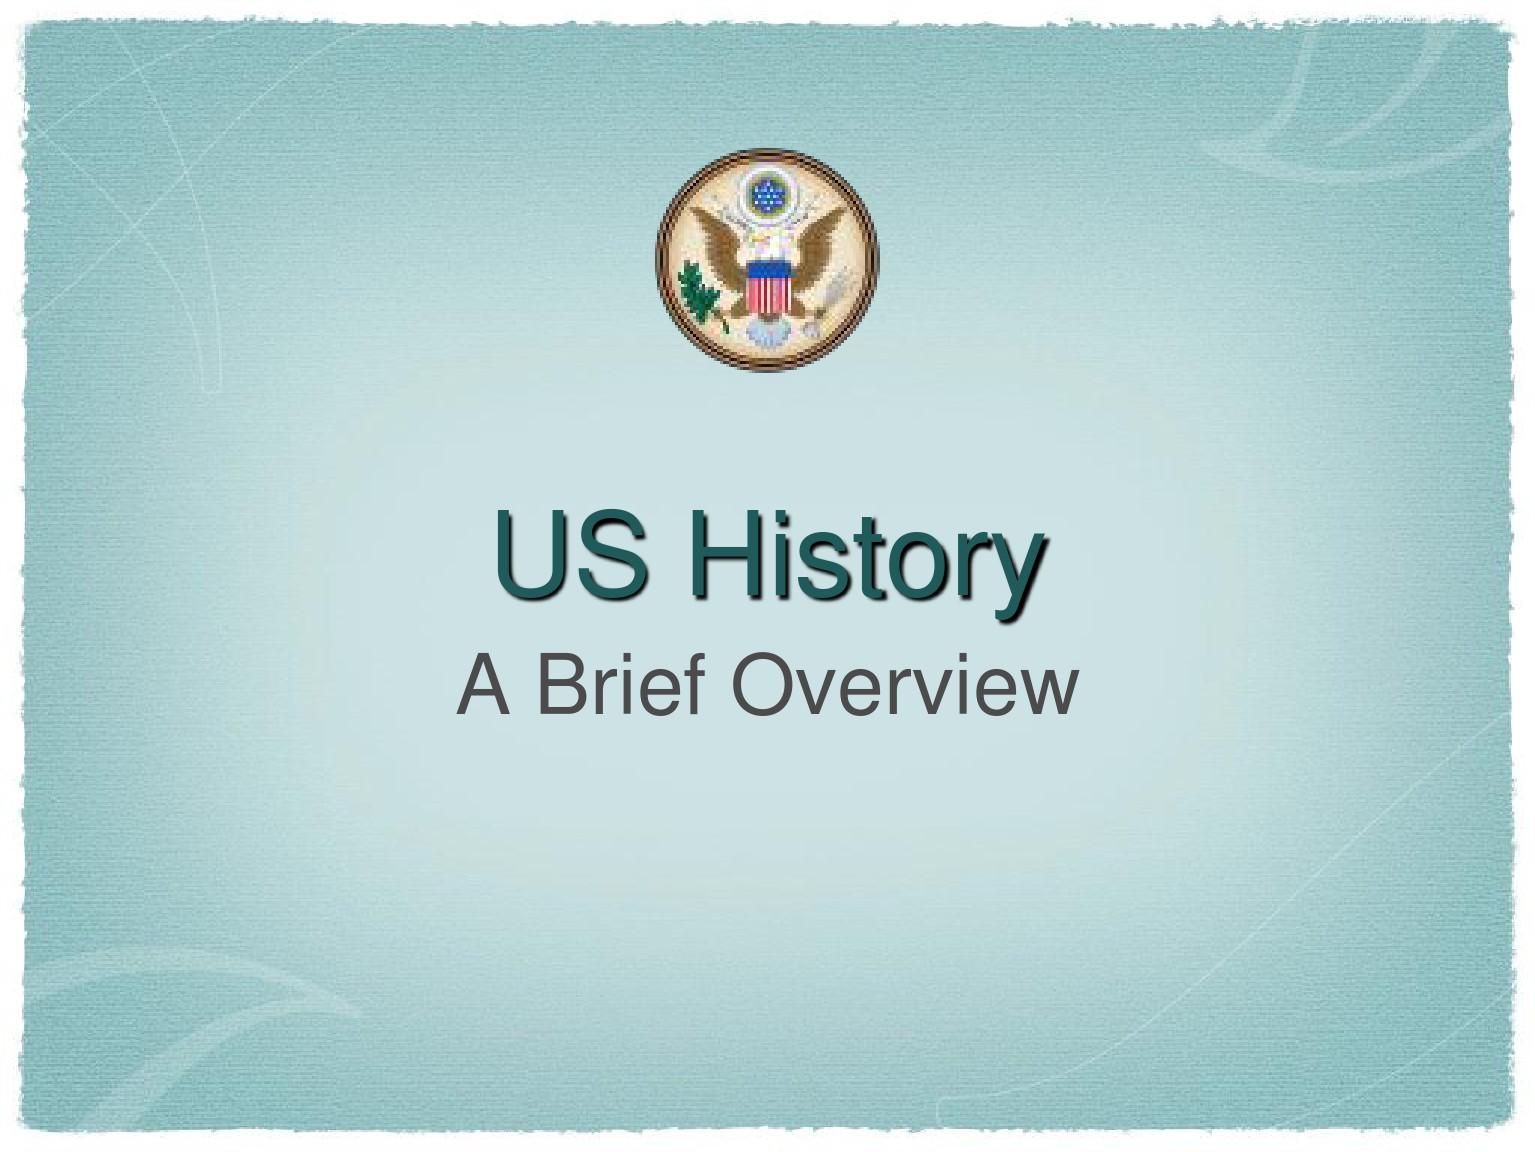 History-of-the-USA